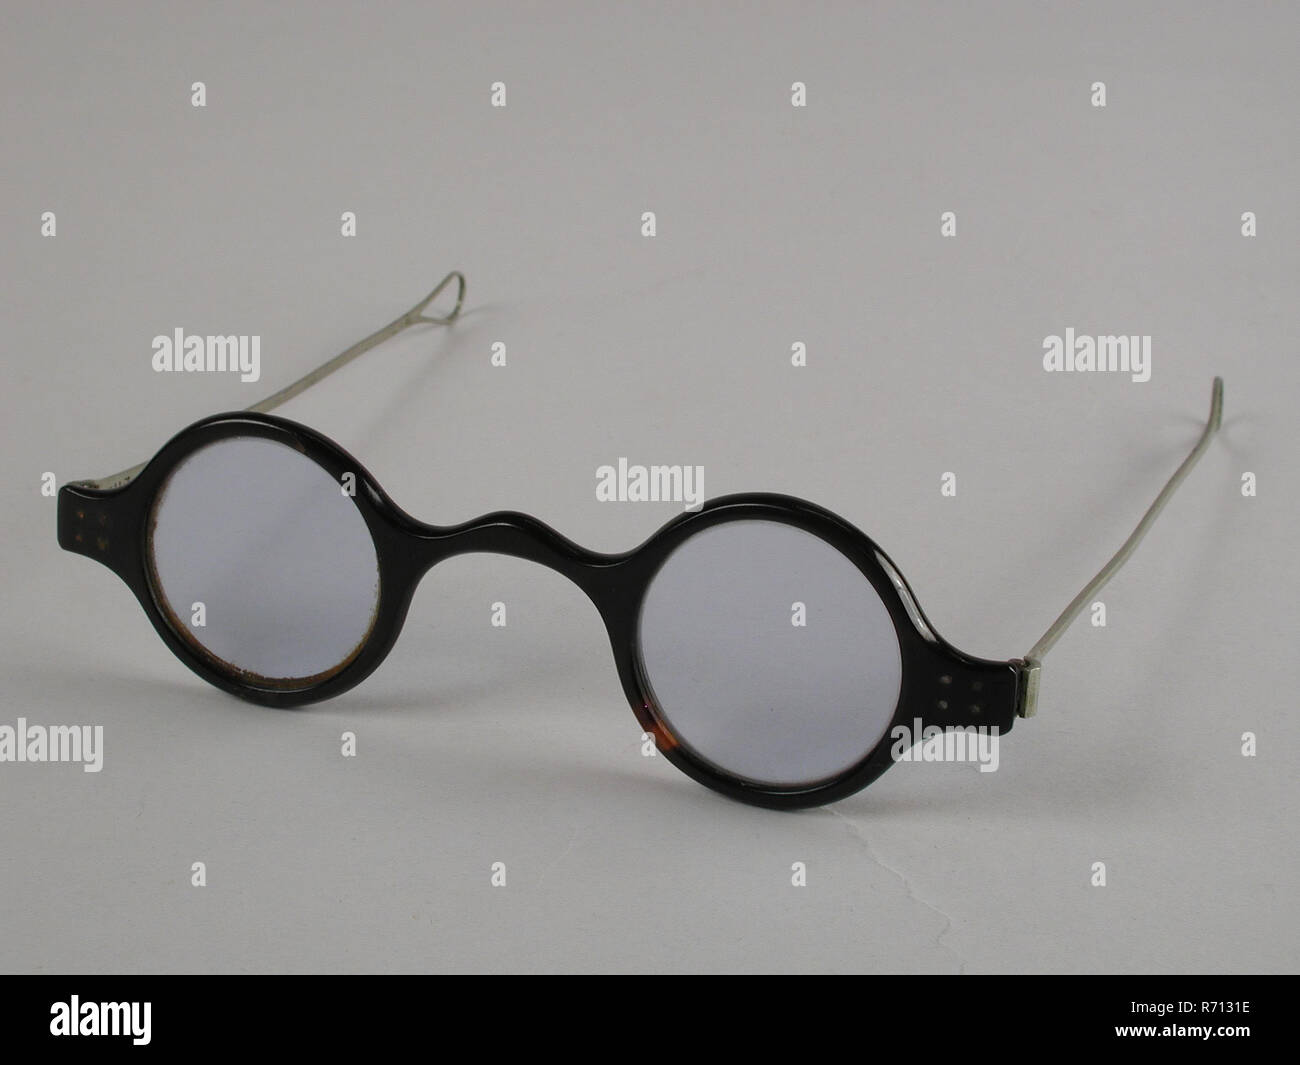 Glasses with round glasses in turtle frame with silver colored metal ...